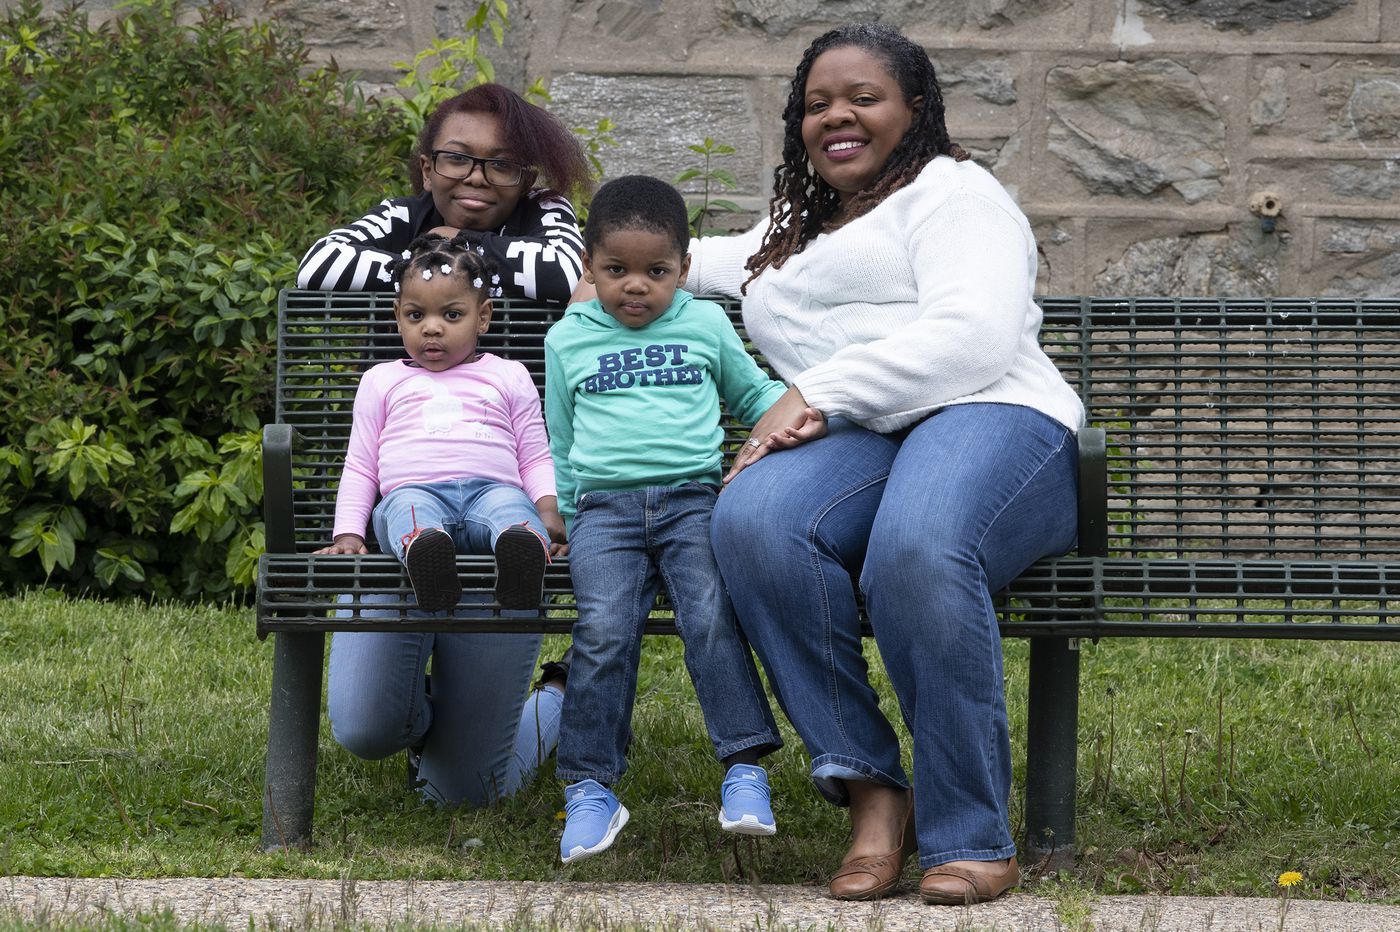 Kyana Hopkins-Thomas, right, is photographed with her kids, Imani Thomas, 15; Imara Thomas, 1; and Keion Thomas, 2, near their home in Philadelphia. Kyana is teacher who is juggling her students' needs with her own children. Image by Jose F. Moreno. United States, 2020.